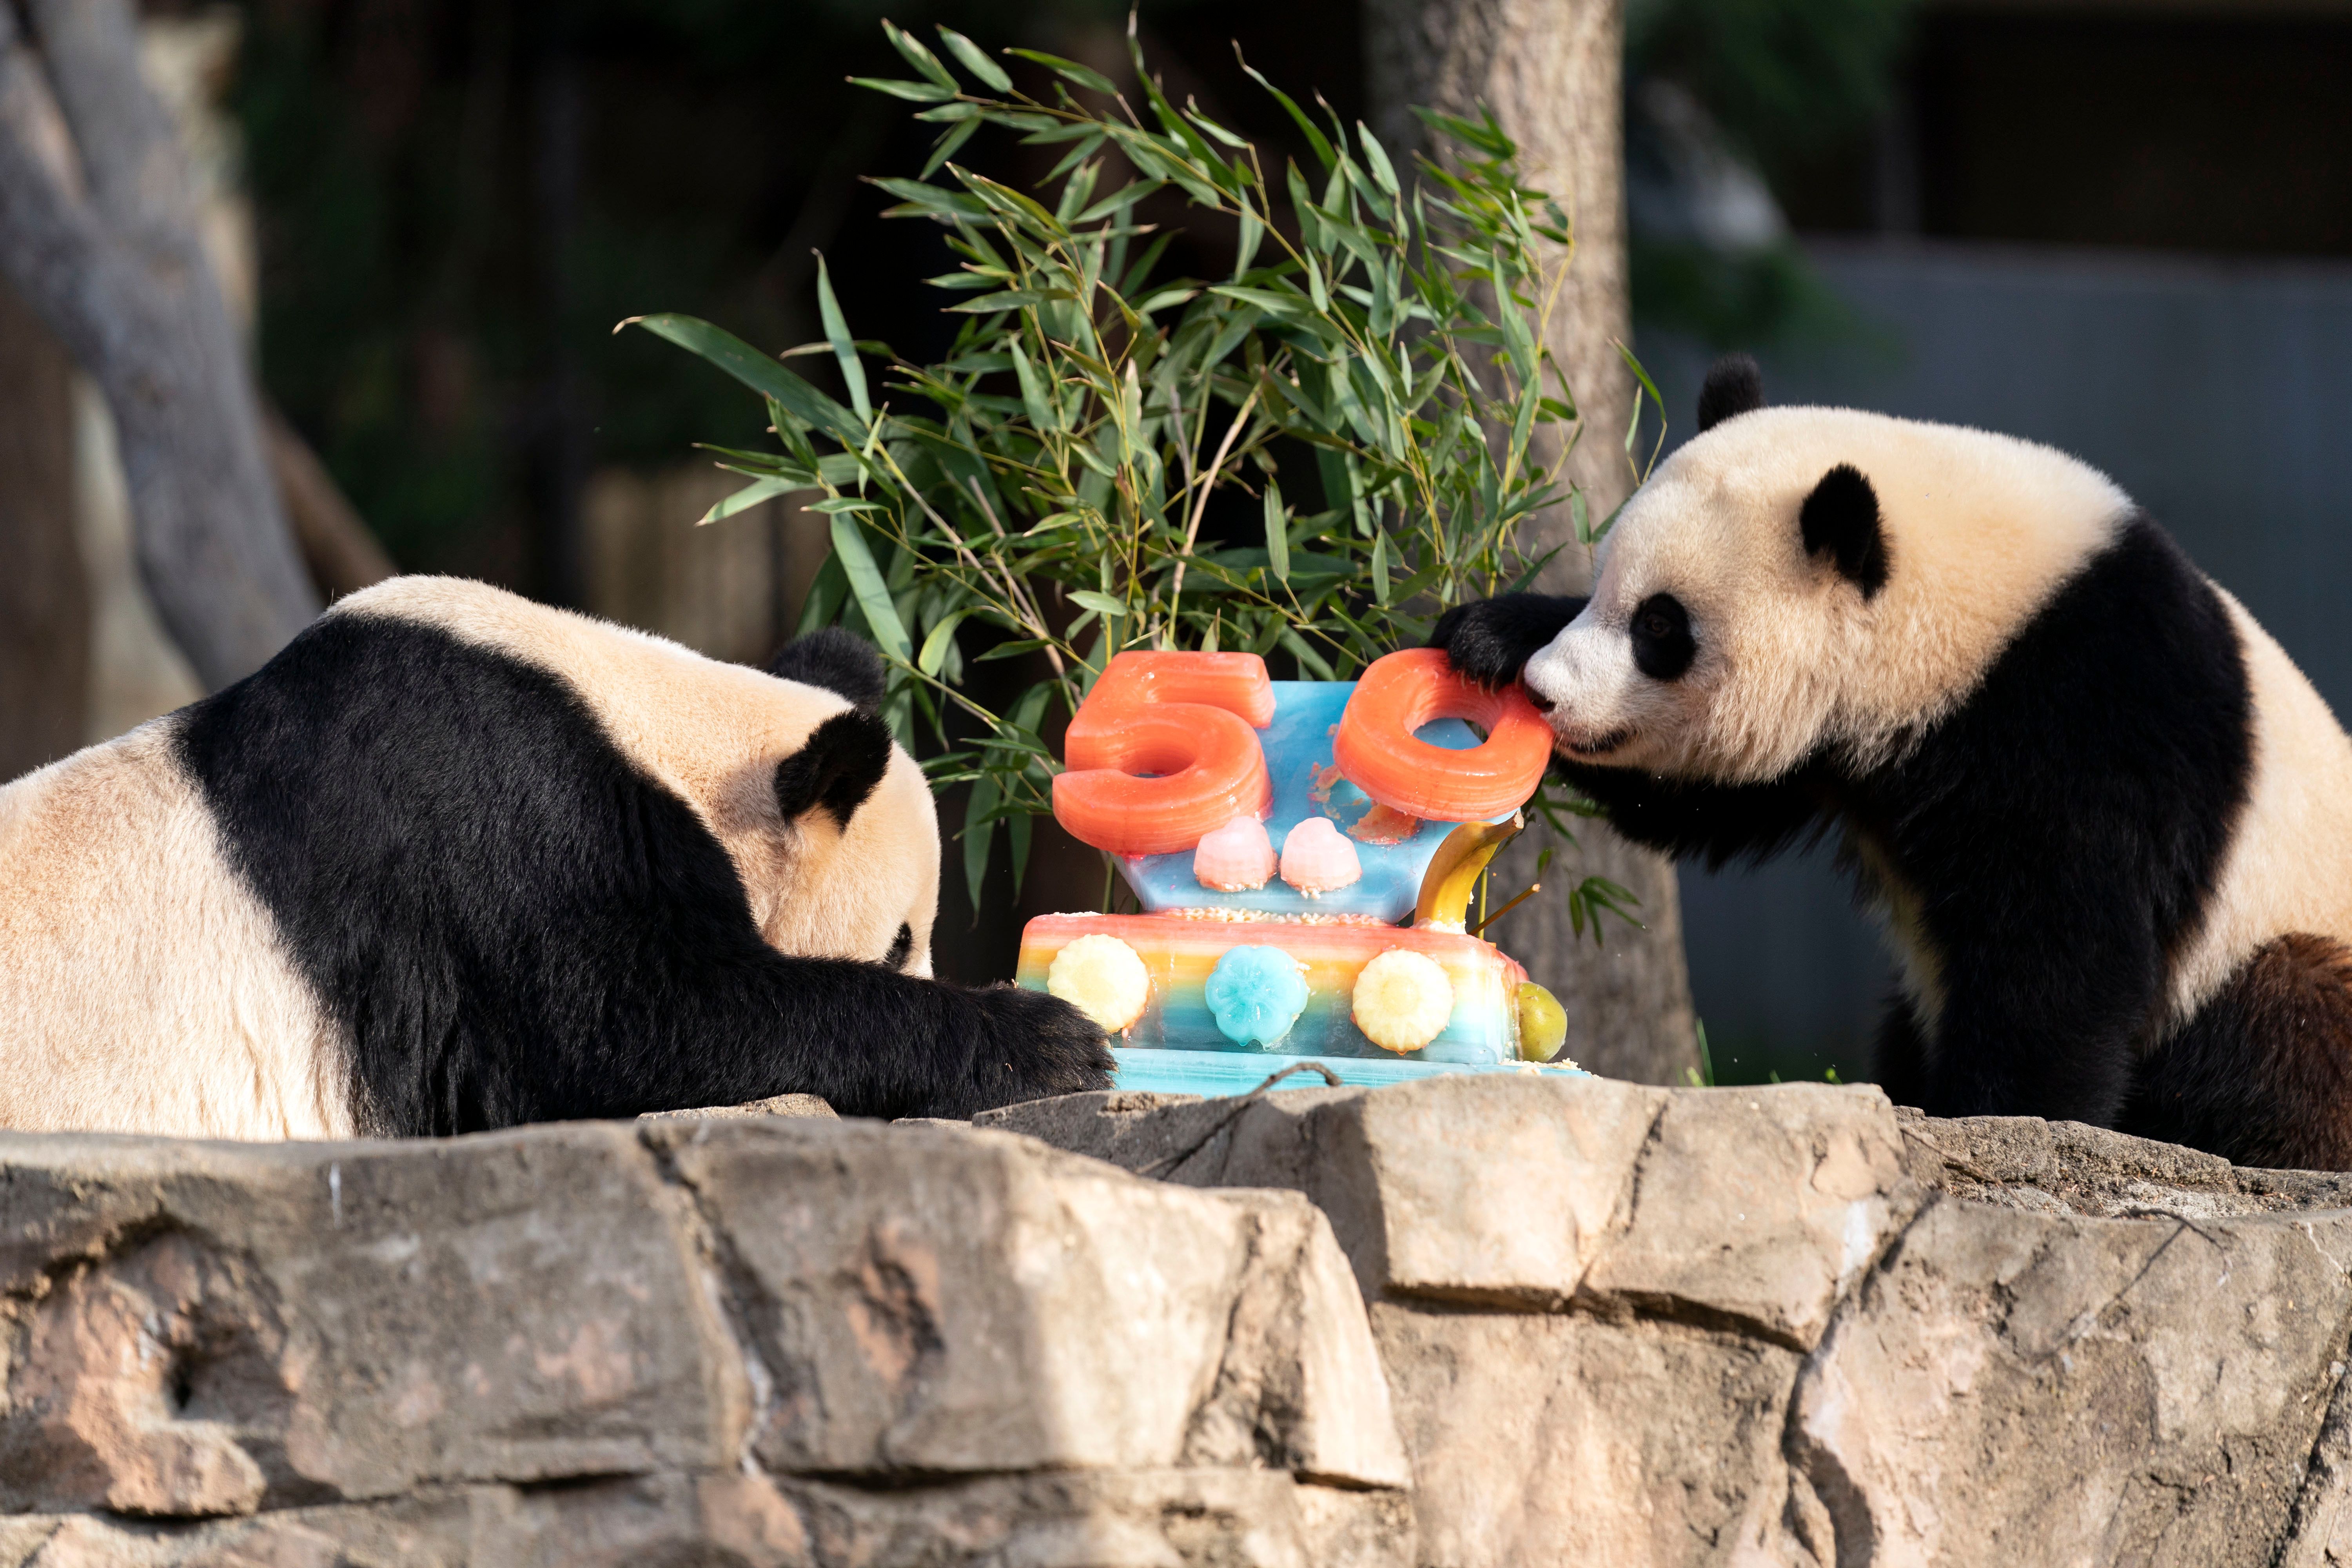 Bring on the cake: France's baby panda has his 1st birthday | WWMT